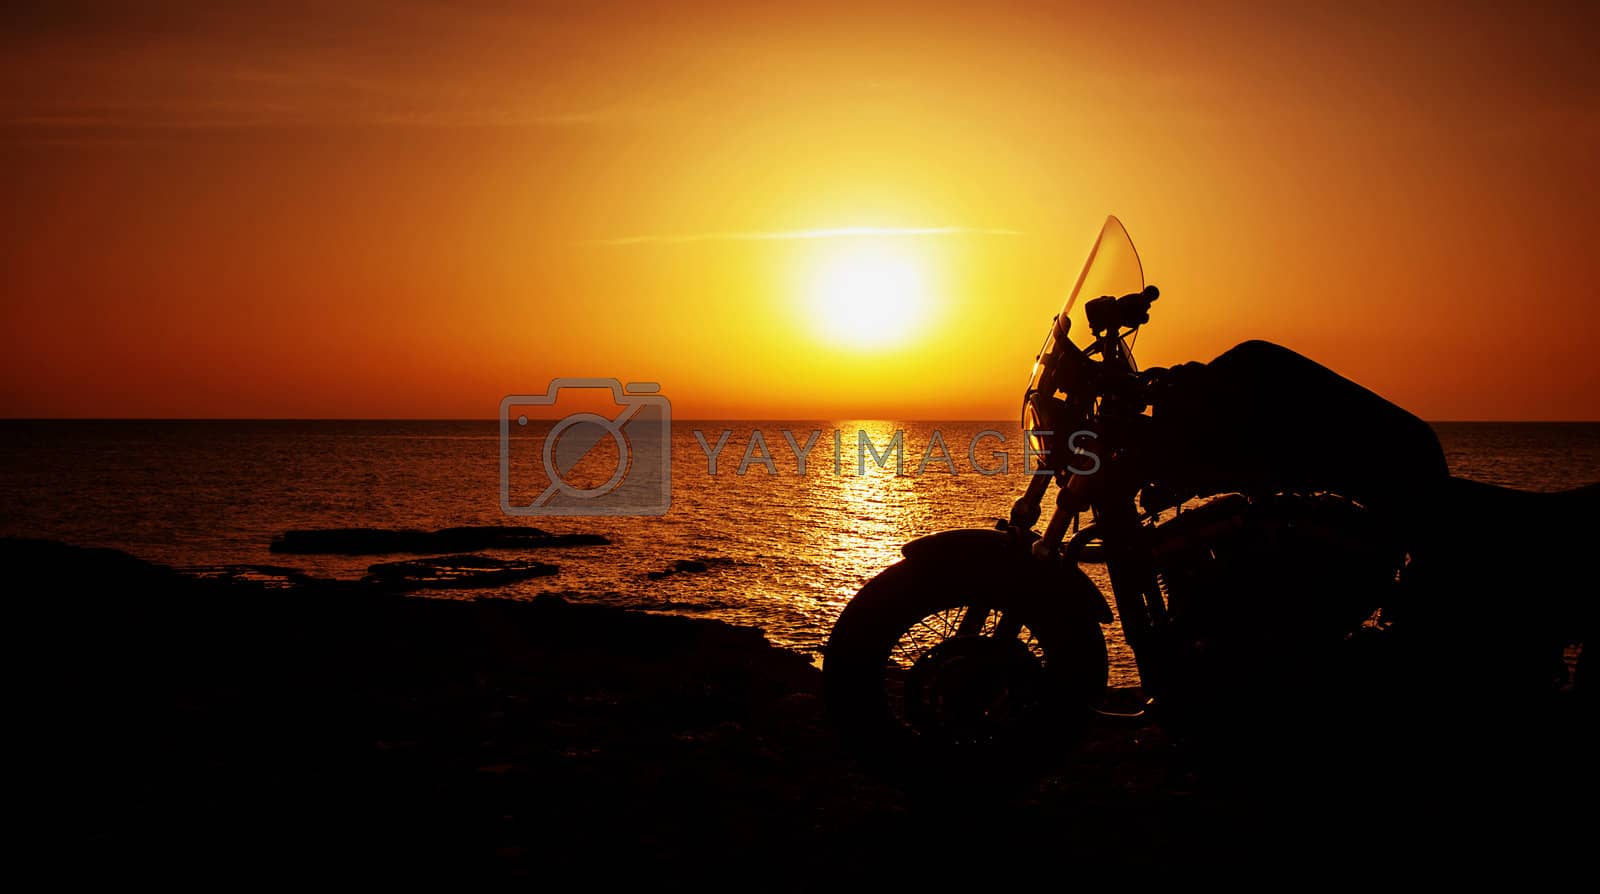 Royalty free image of Motorcycle on sunset by Anna_Omelchenko